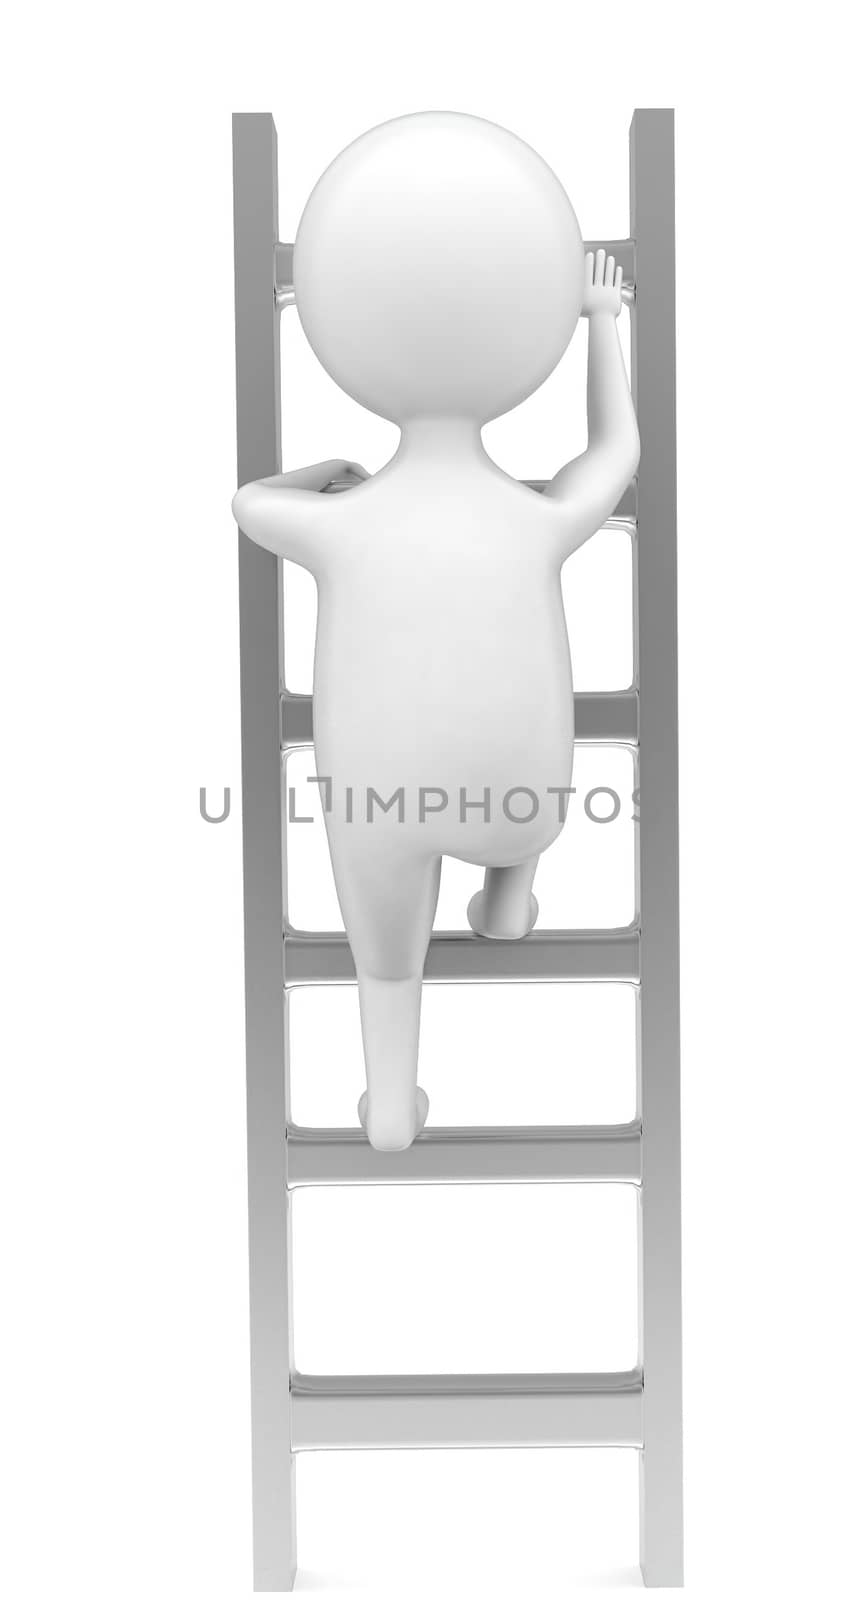 3d man climbing up ladder concept by qualityrender